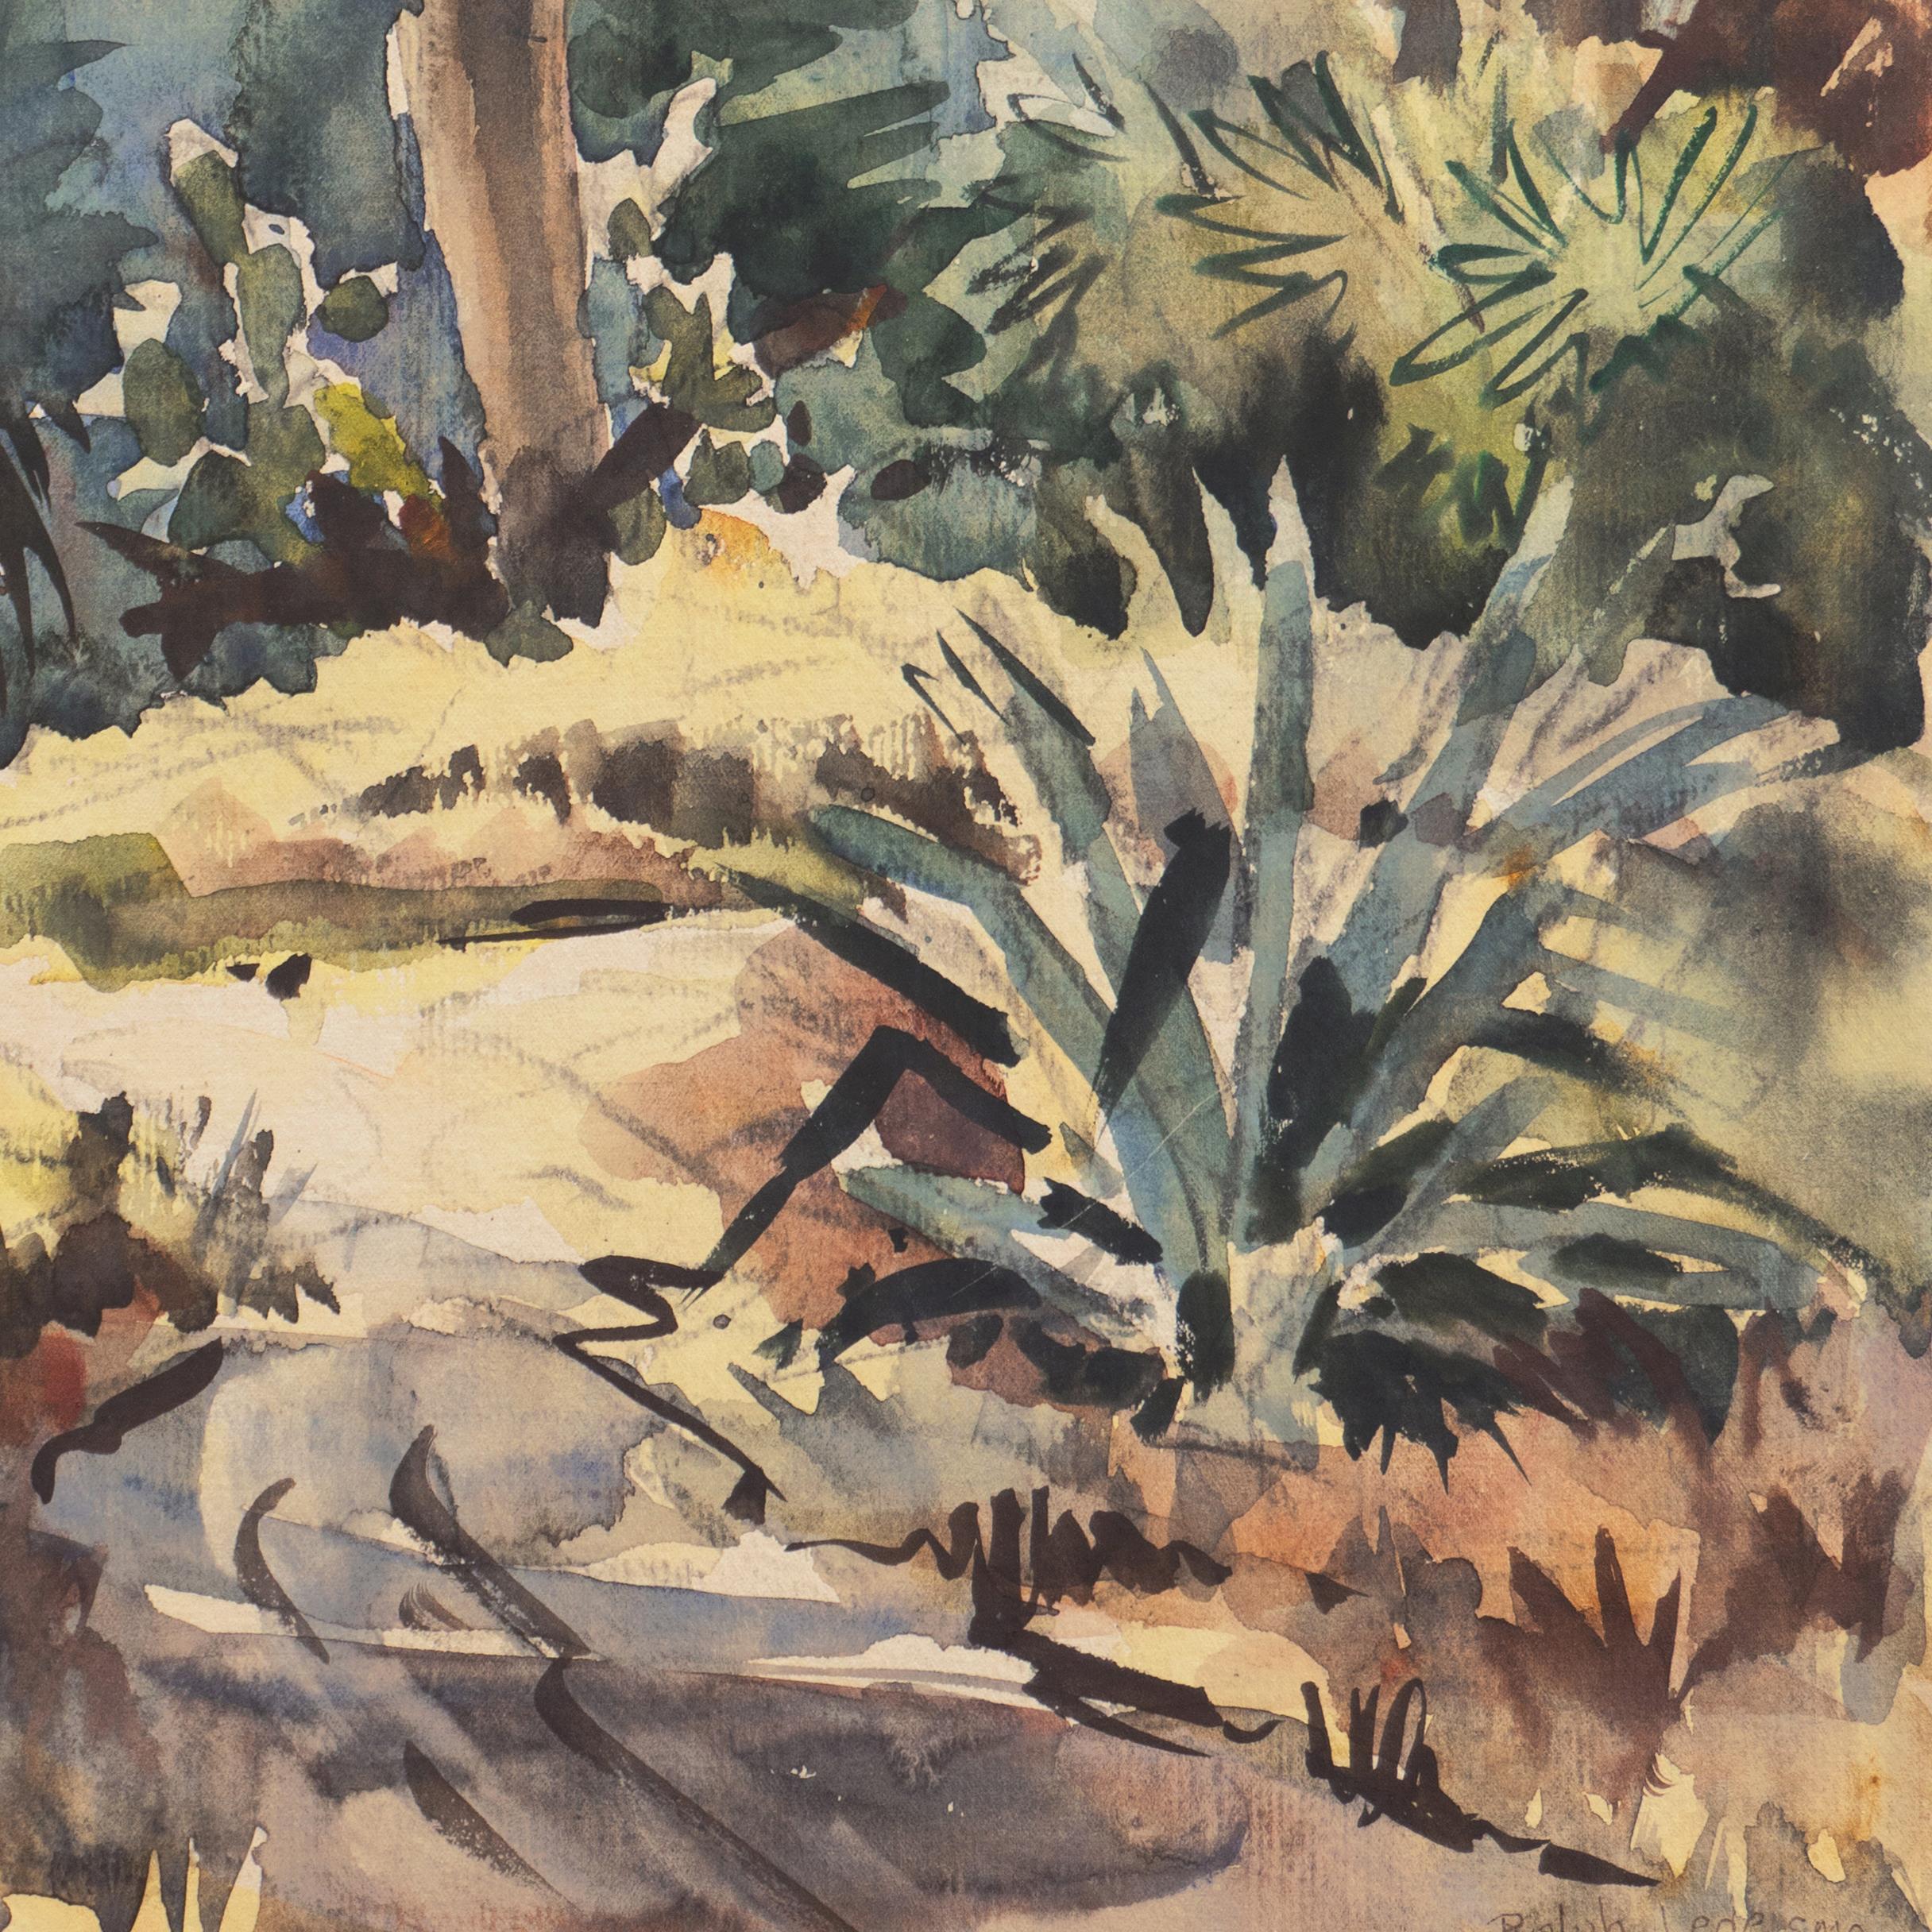 Signed lower right, 'Ralph Ledesma' (American, 1910-1993) and painted circa 1950.

An impressionist watercolor showing a view of a Southern California garden with palm trees and agave. 

Ralph Ledesma was born in Hawaii and moved to California as a